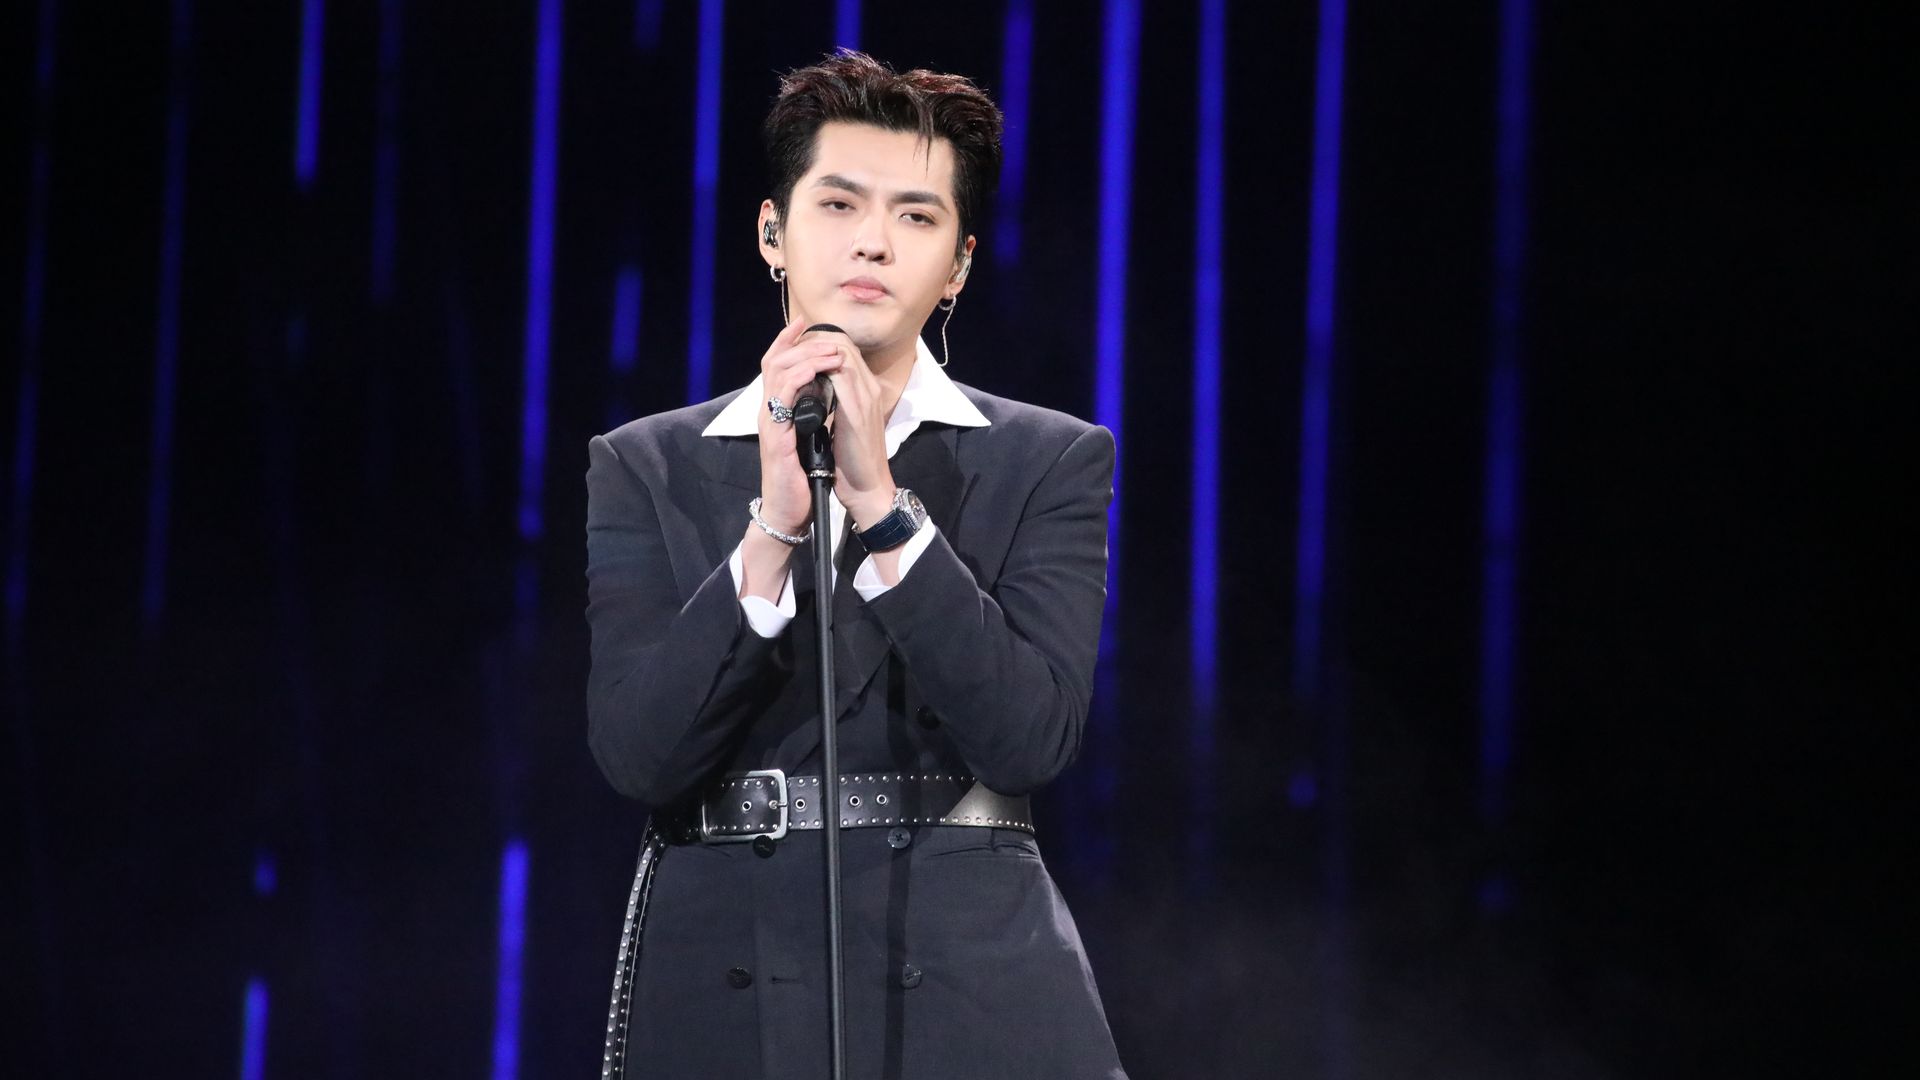 Singer Kris Wu performs on the stage during 2020 Tencent Video Star Awards on December 20, 2020 i